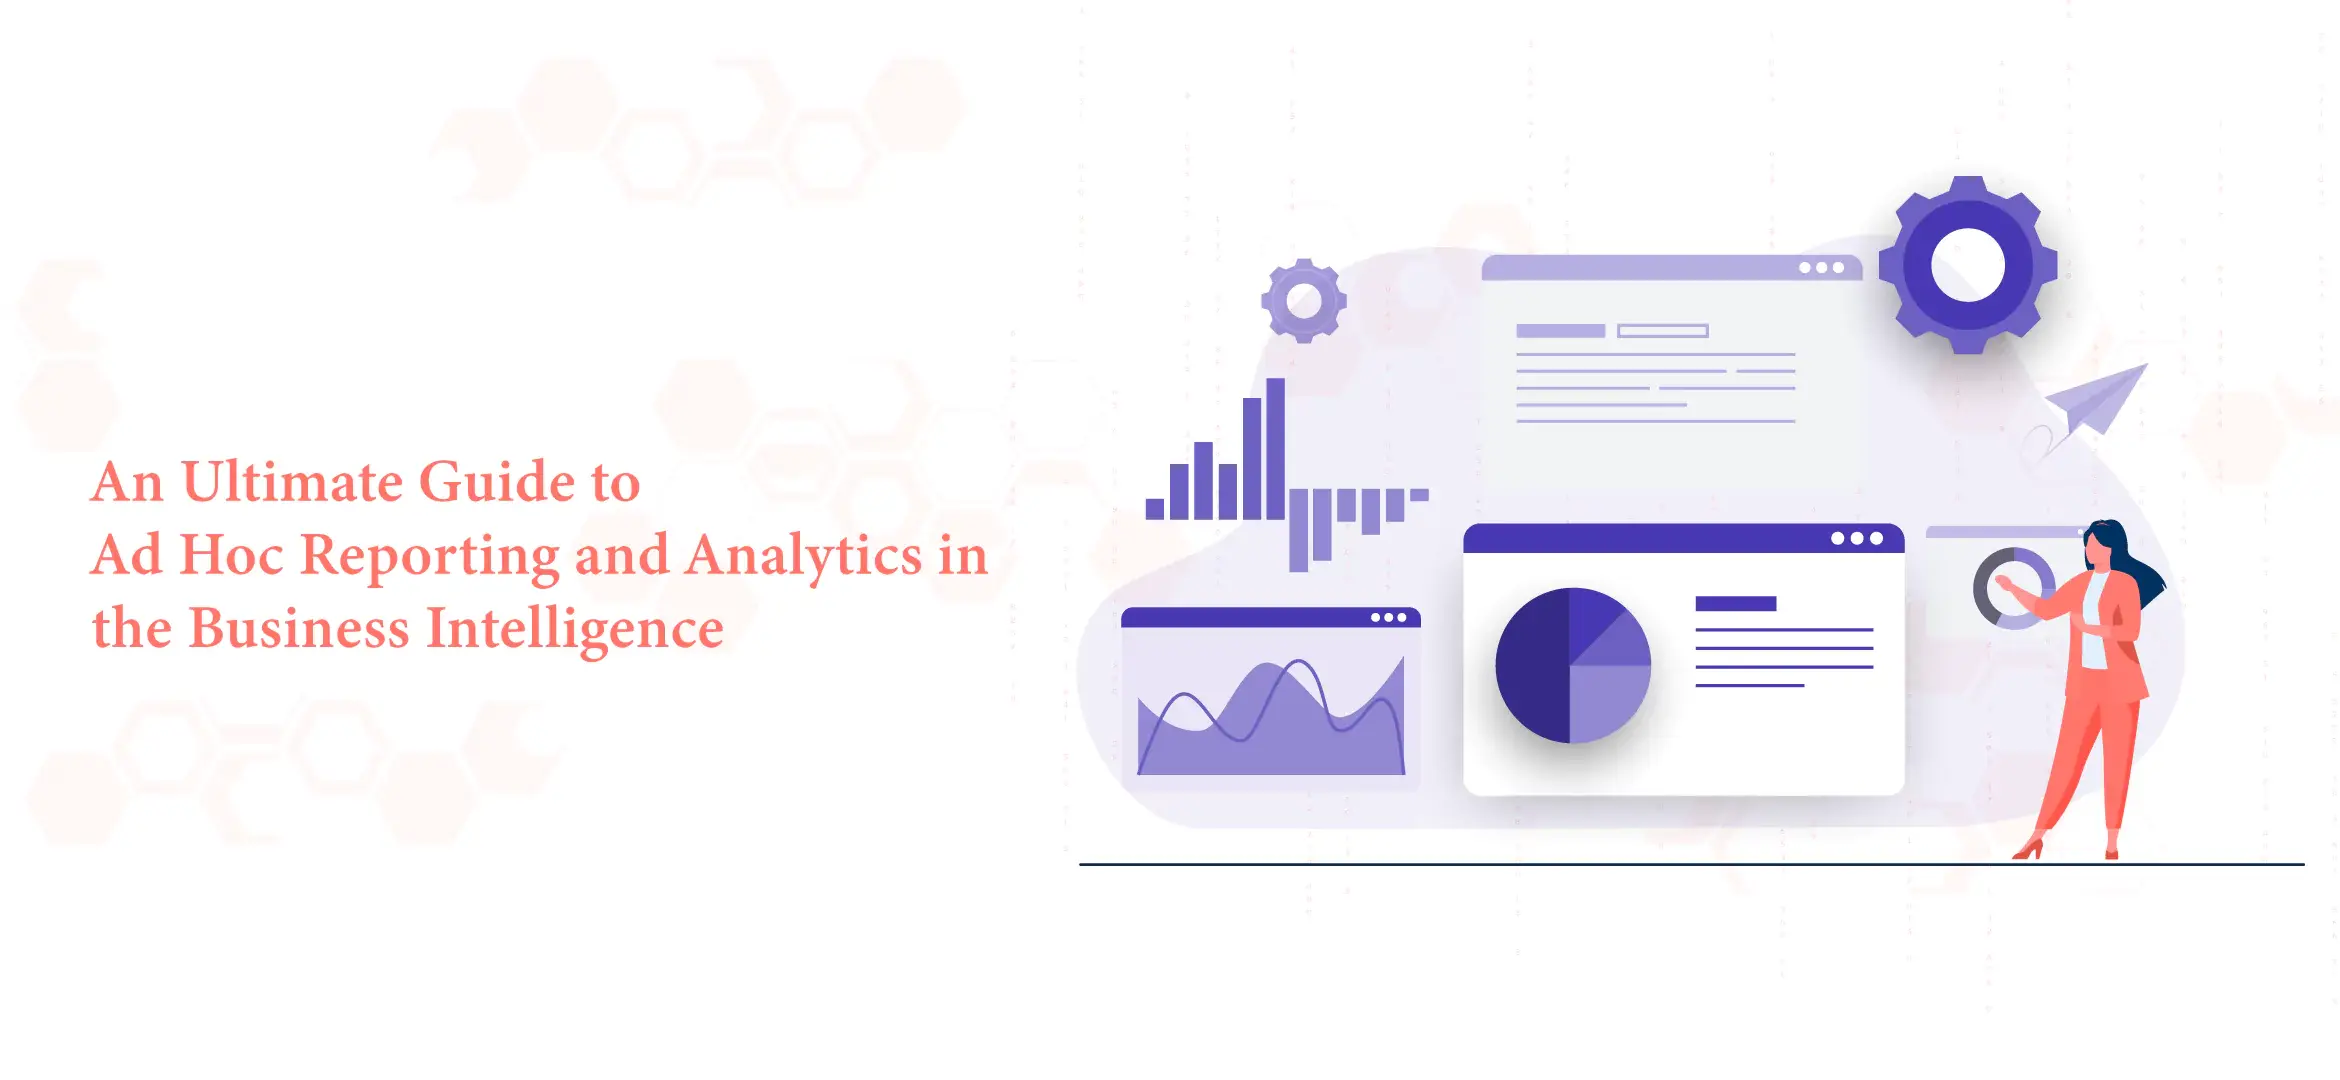 1709707384An Ultimate Guide to Ad Hoc Reporting & Analytics in the Business Intelligence.webp